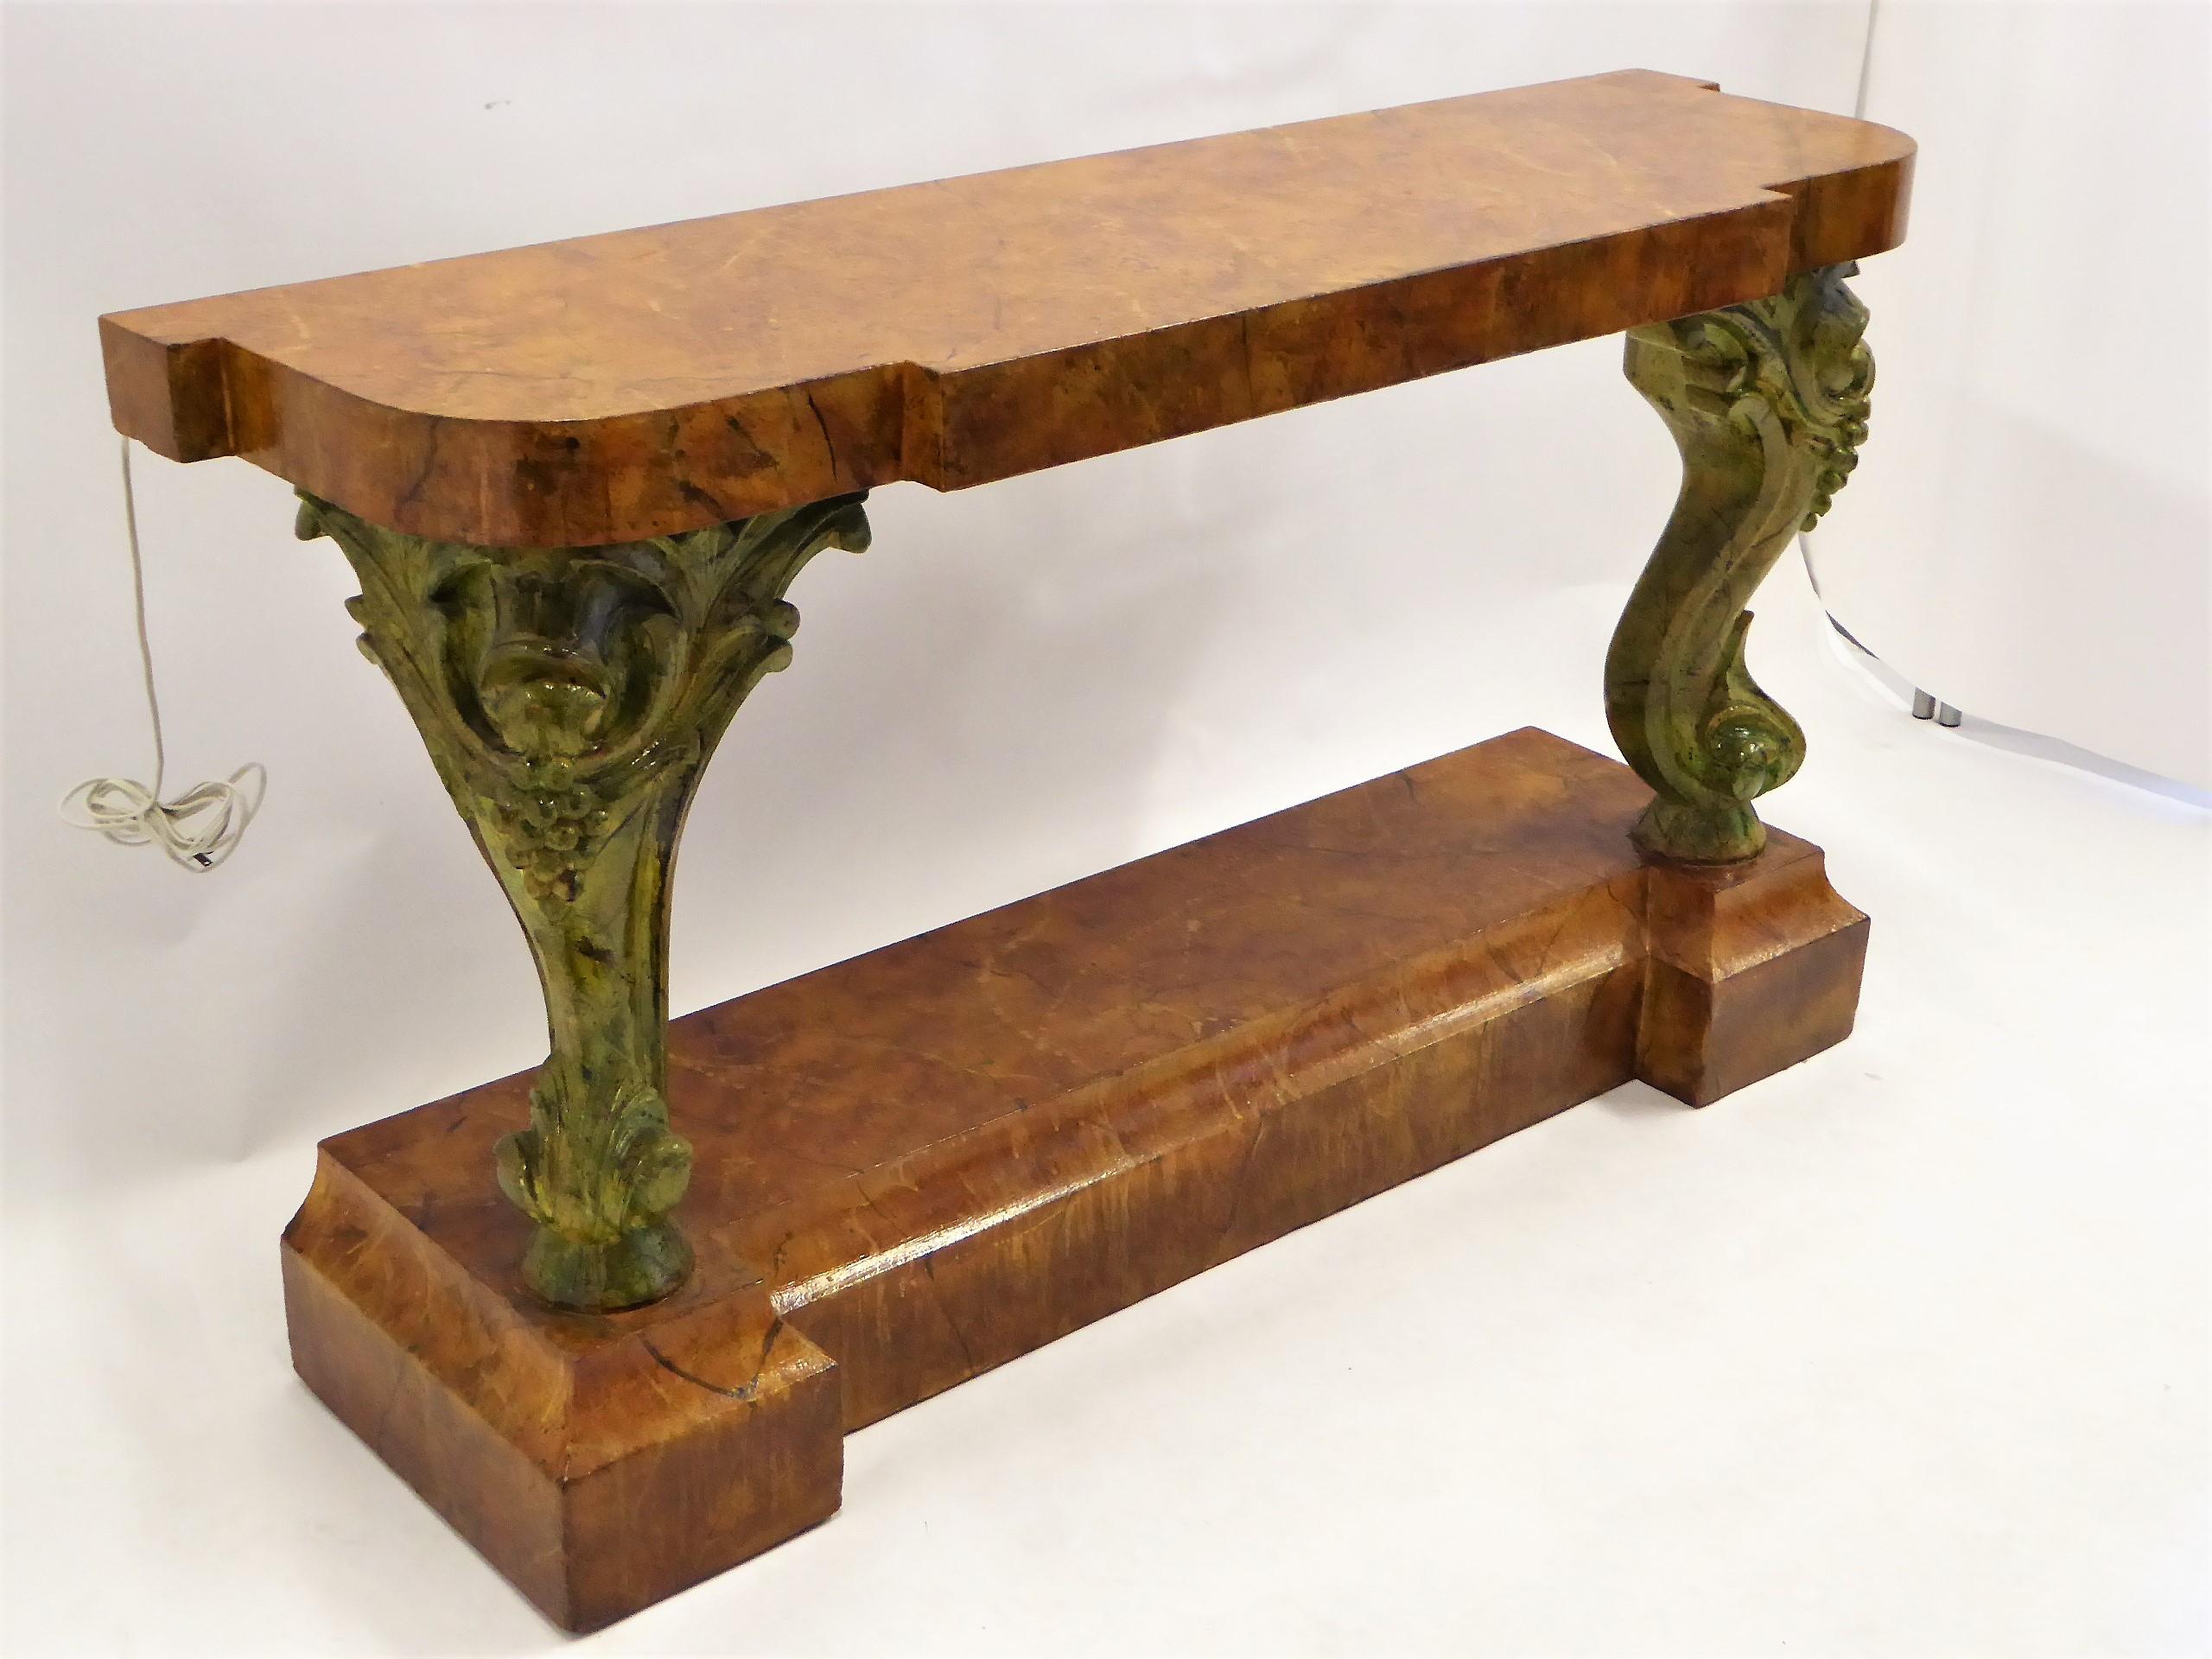 REDUCED FROM $2,950....Massive and beautifully carved Victorian Grand Piano legs highlight this later imagined Romantic Console. With a striking faux marble finish in vibrant colors, the shaped top and tapering plinth base. Exuberant rococo revival